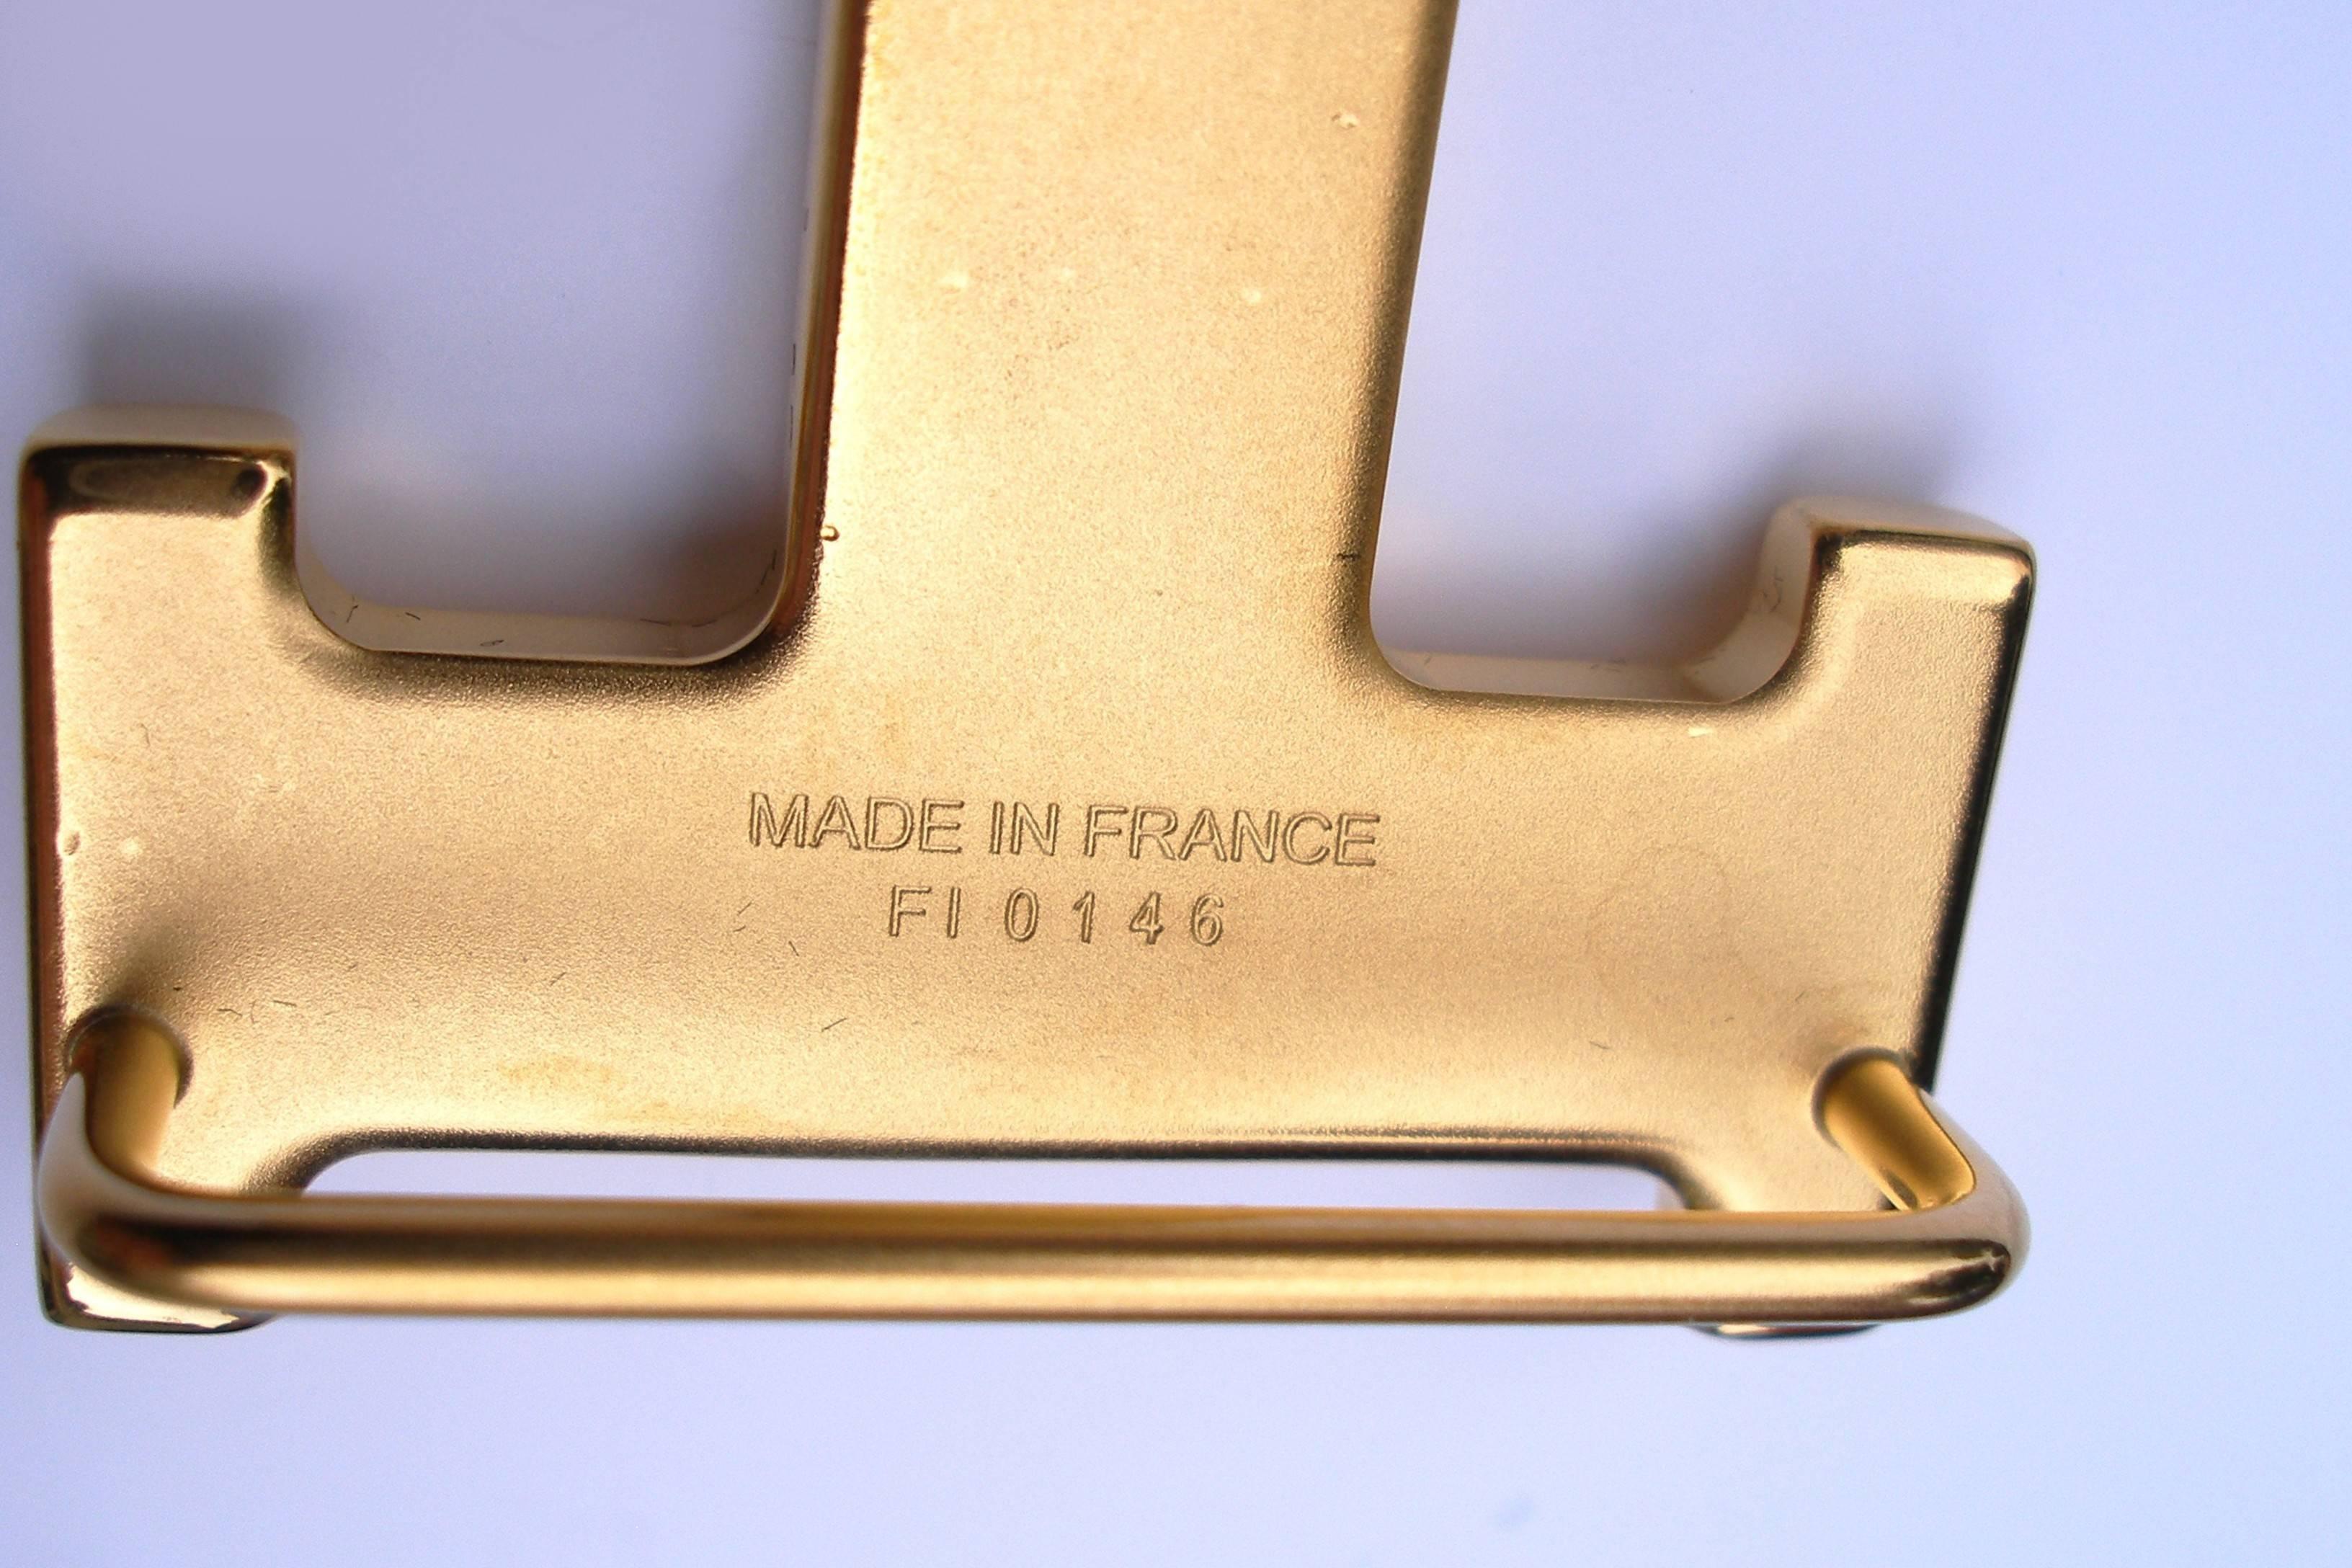  HERMES H Constance Belt Buckle Gold Plated / BRAND NEW  1